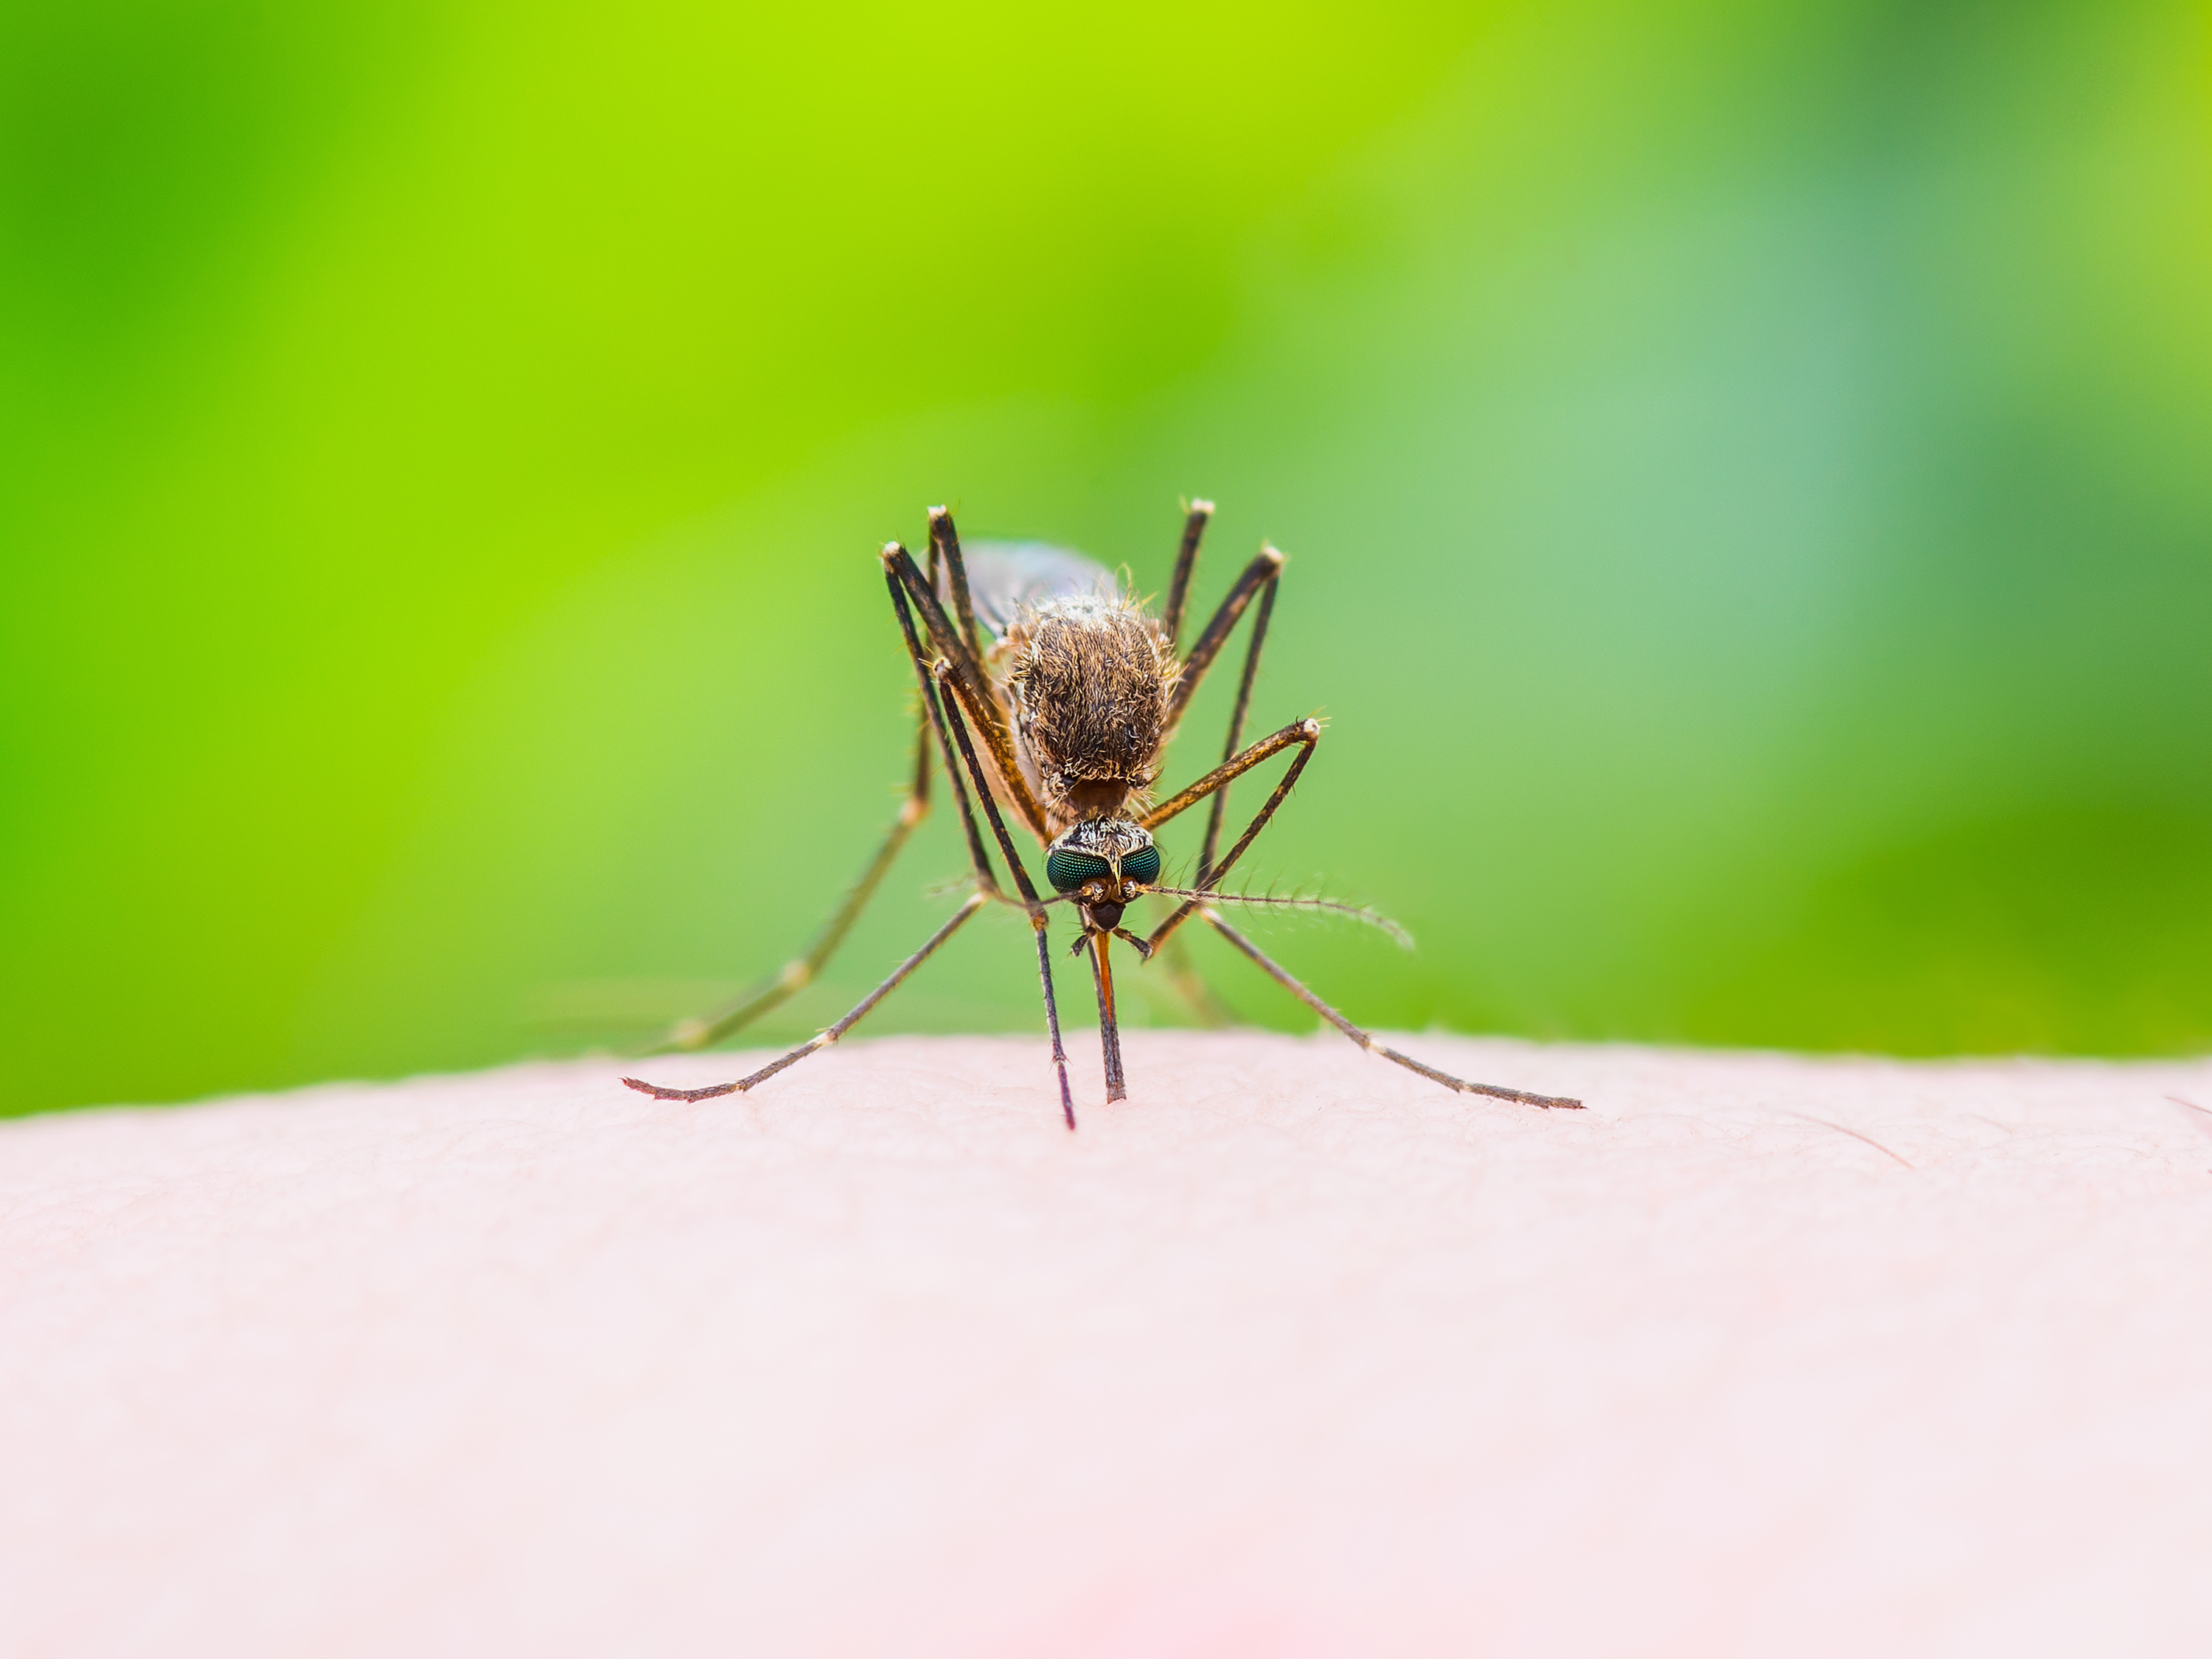 Stinging Mosquito on Green Background